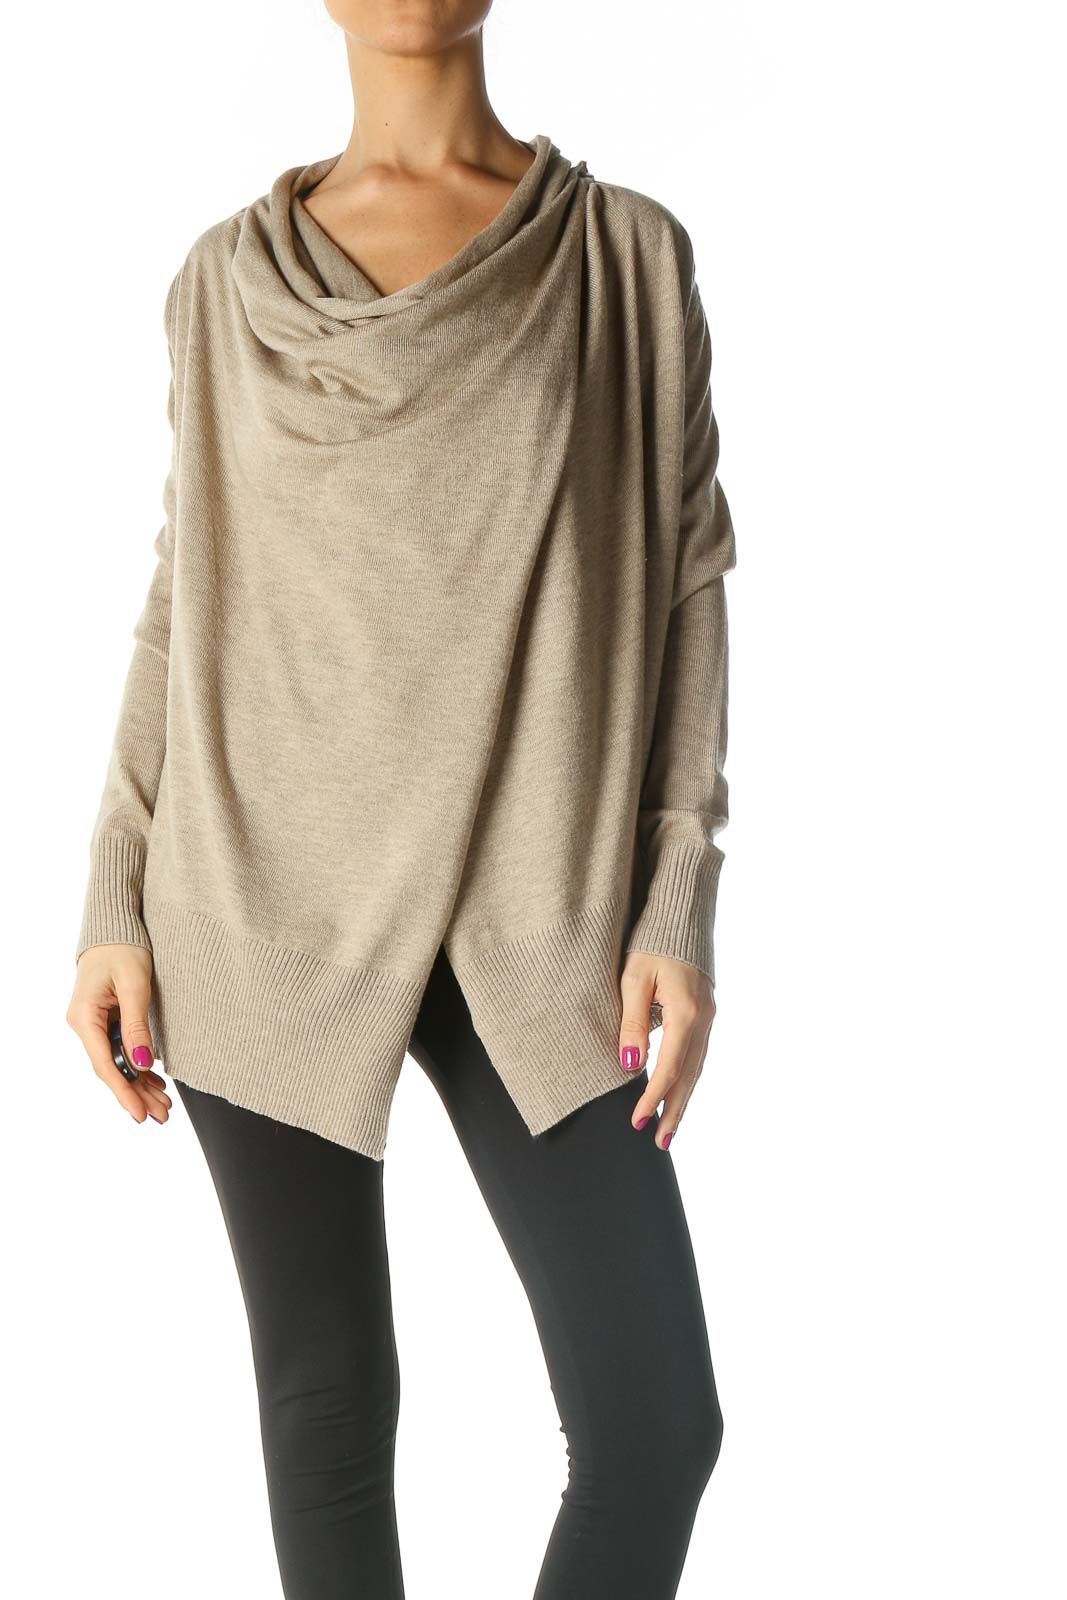 Beige Textured Casual Sweater Front